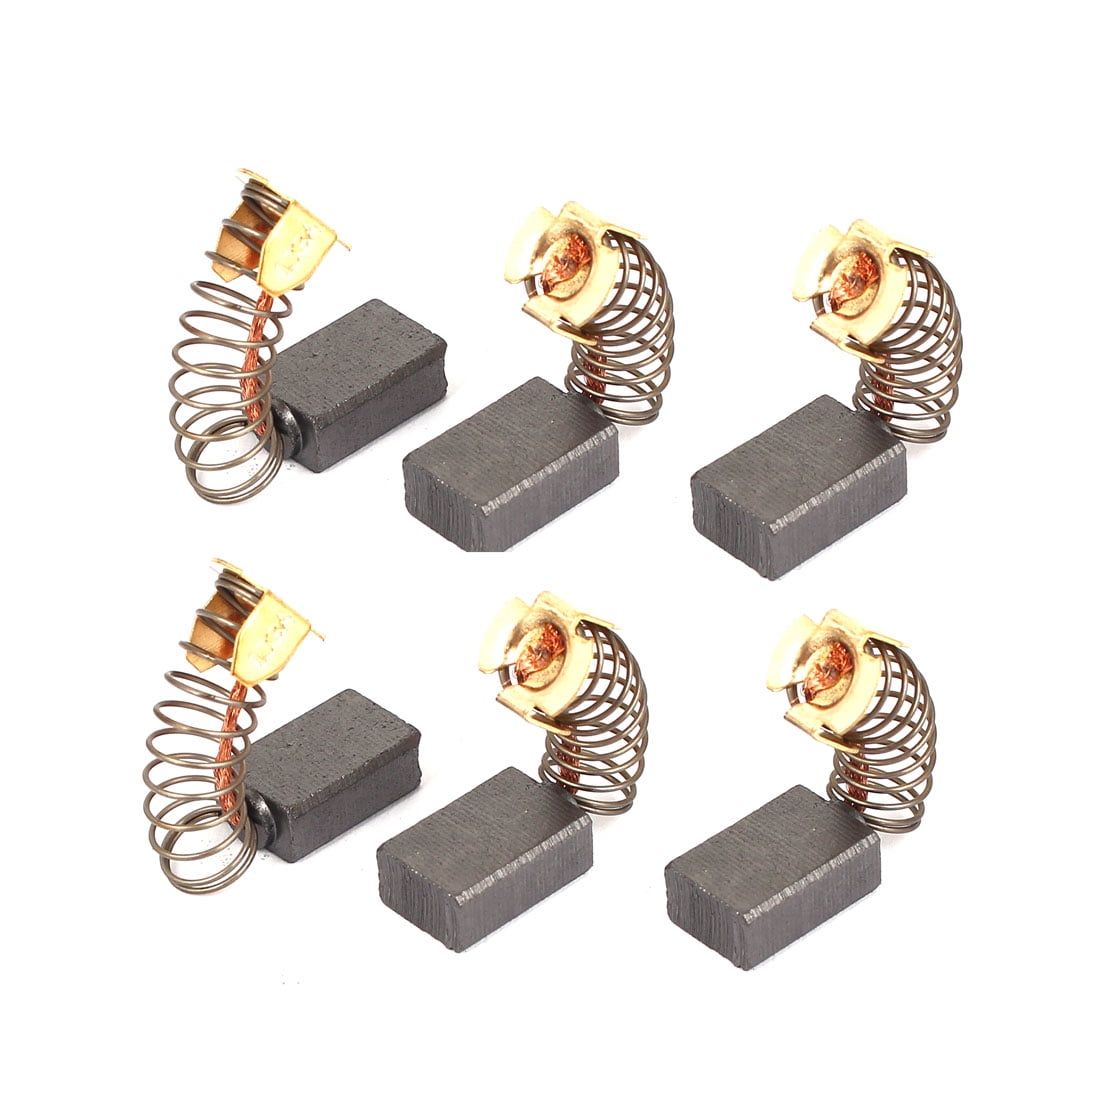 8 Pcs Replacement Electric Motor Carbon Brushes 15mm x 10mm x 6mm for Motors 